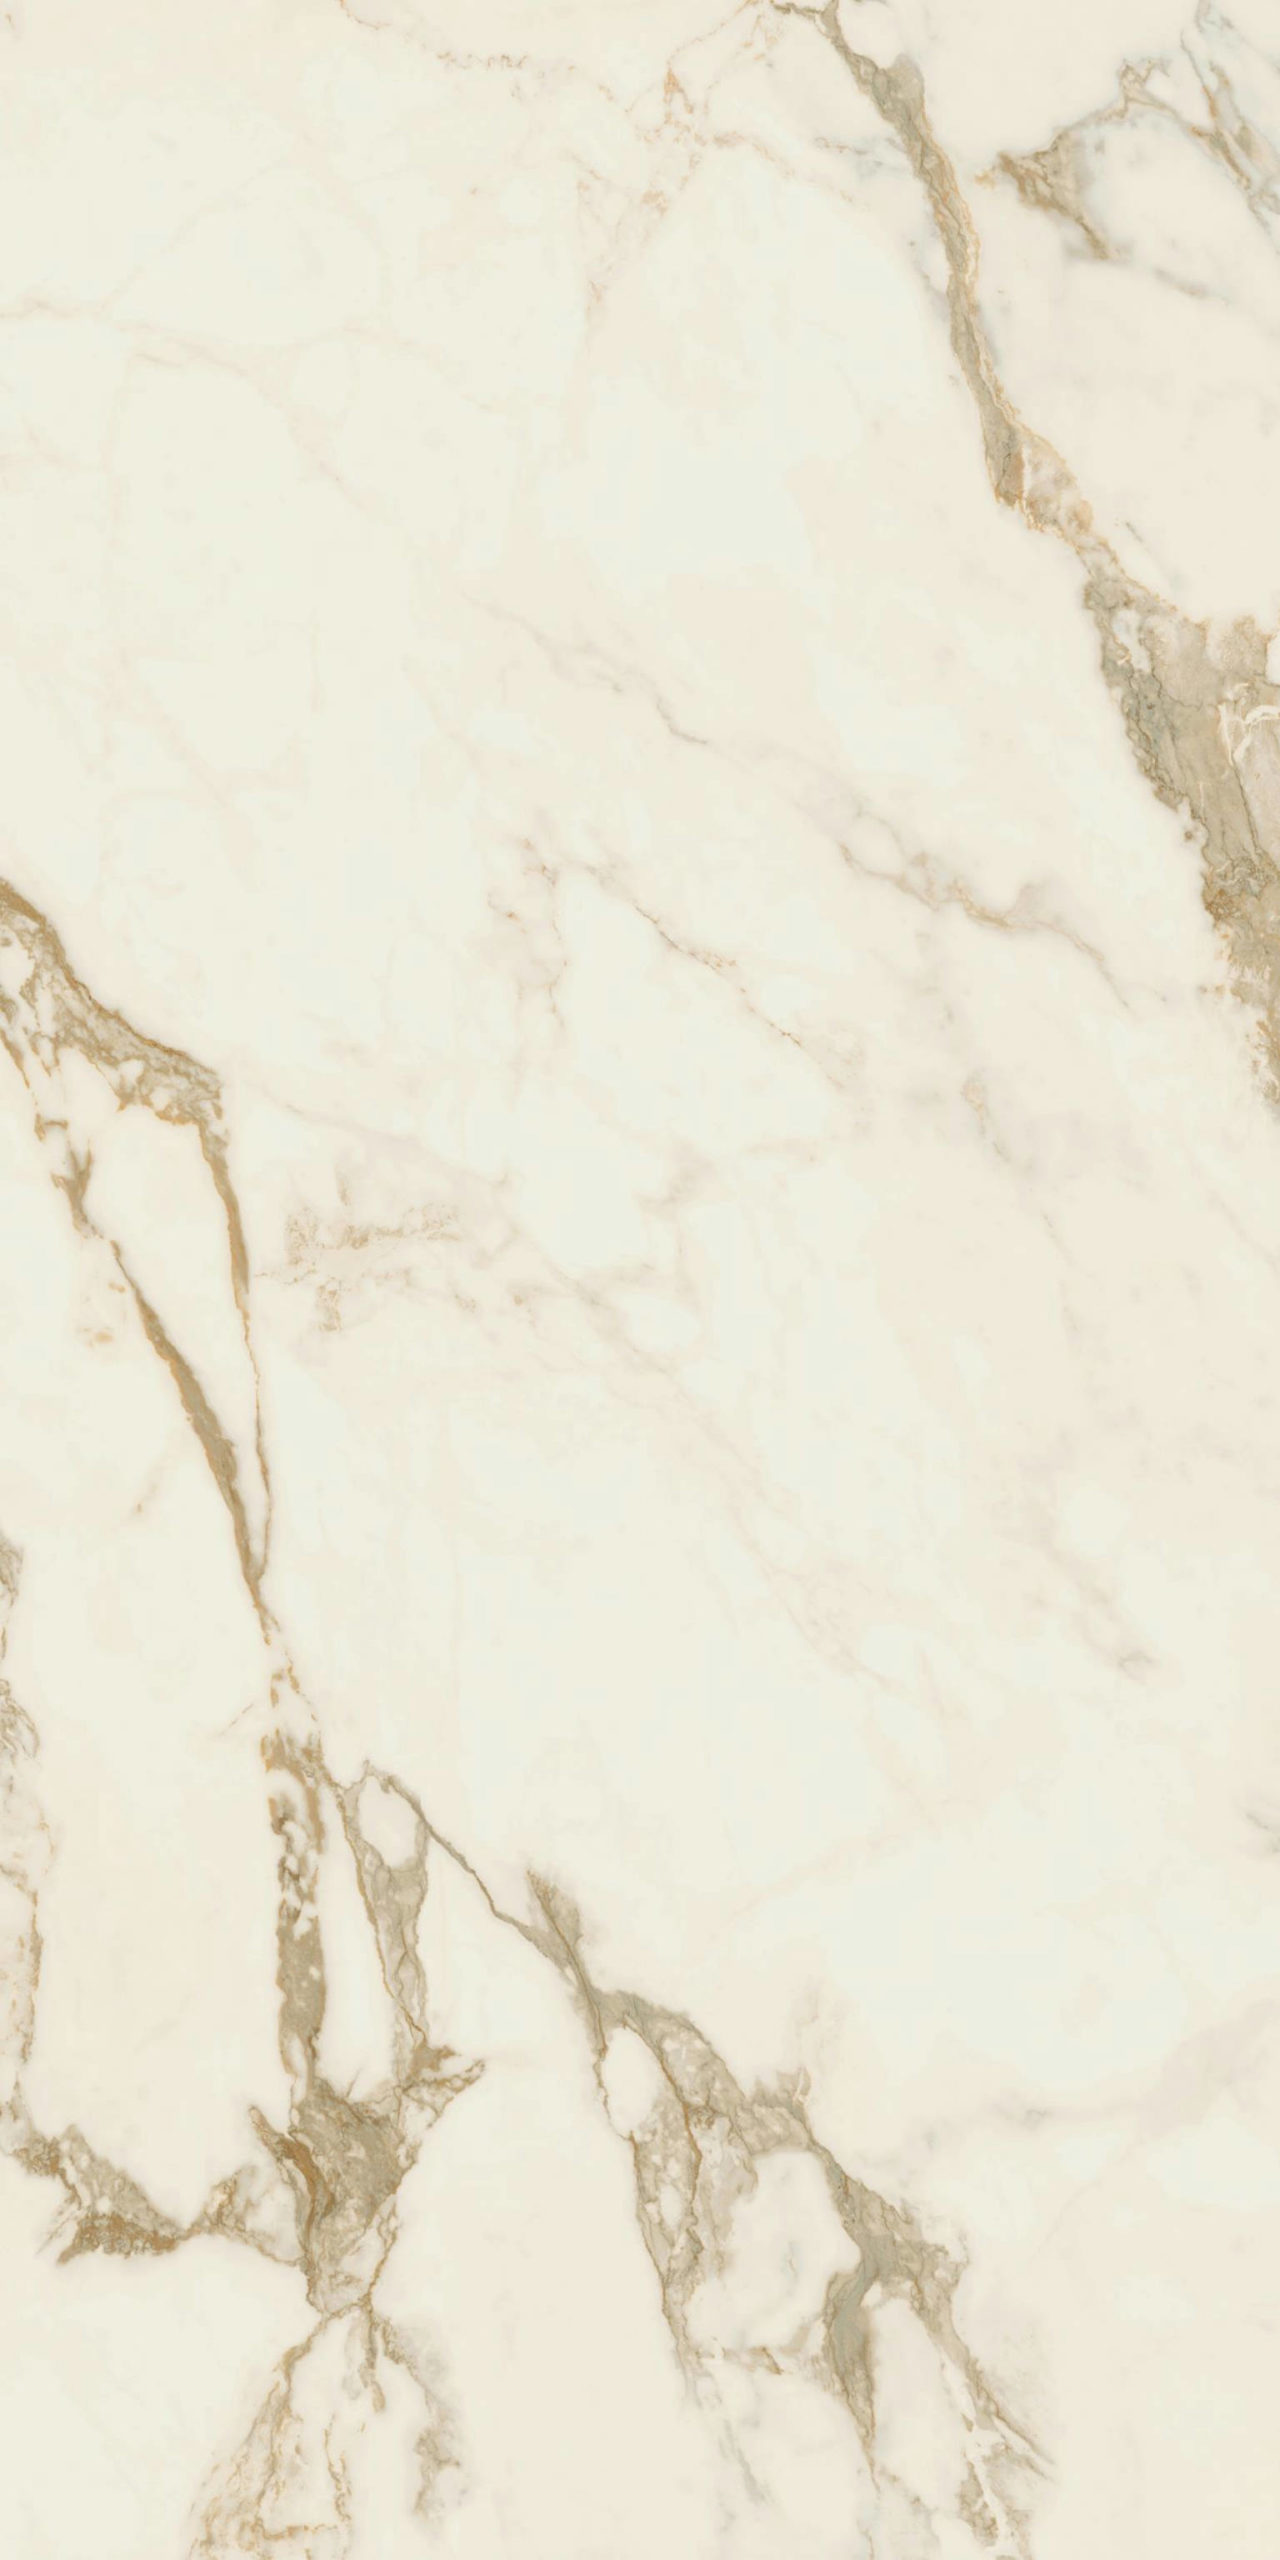 Prestige Calacatta Gold | Stones And More | Finest selection of Mosaics, Glass, Tile and Stone